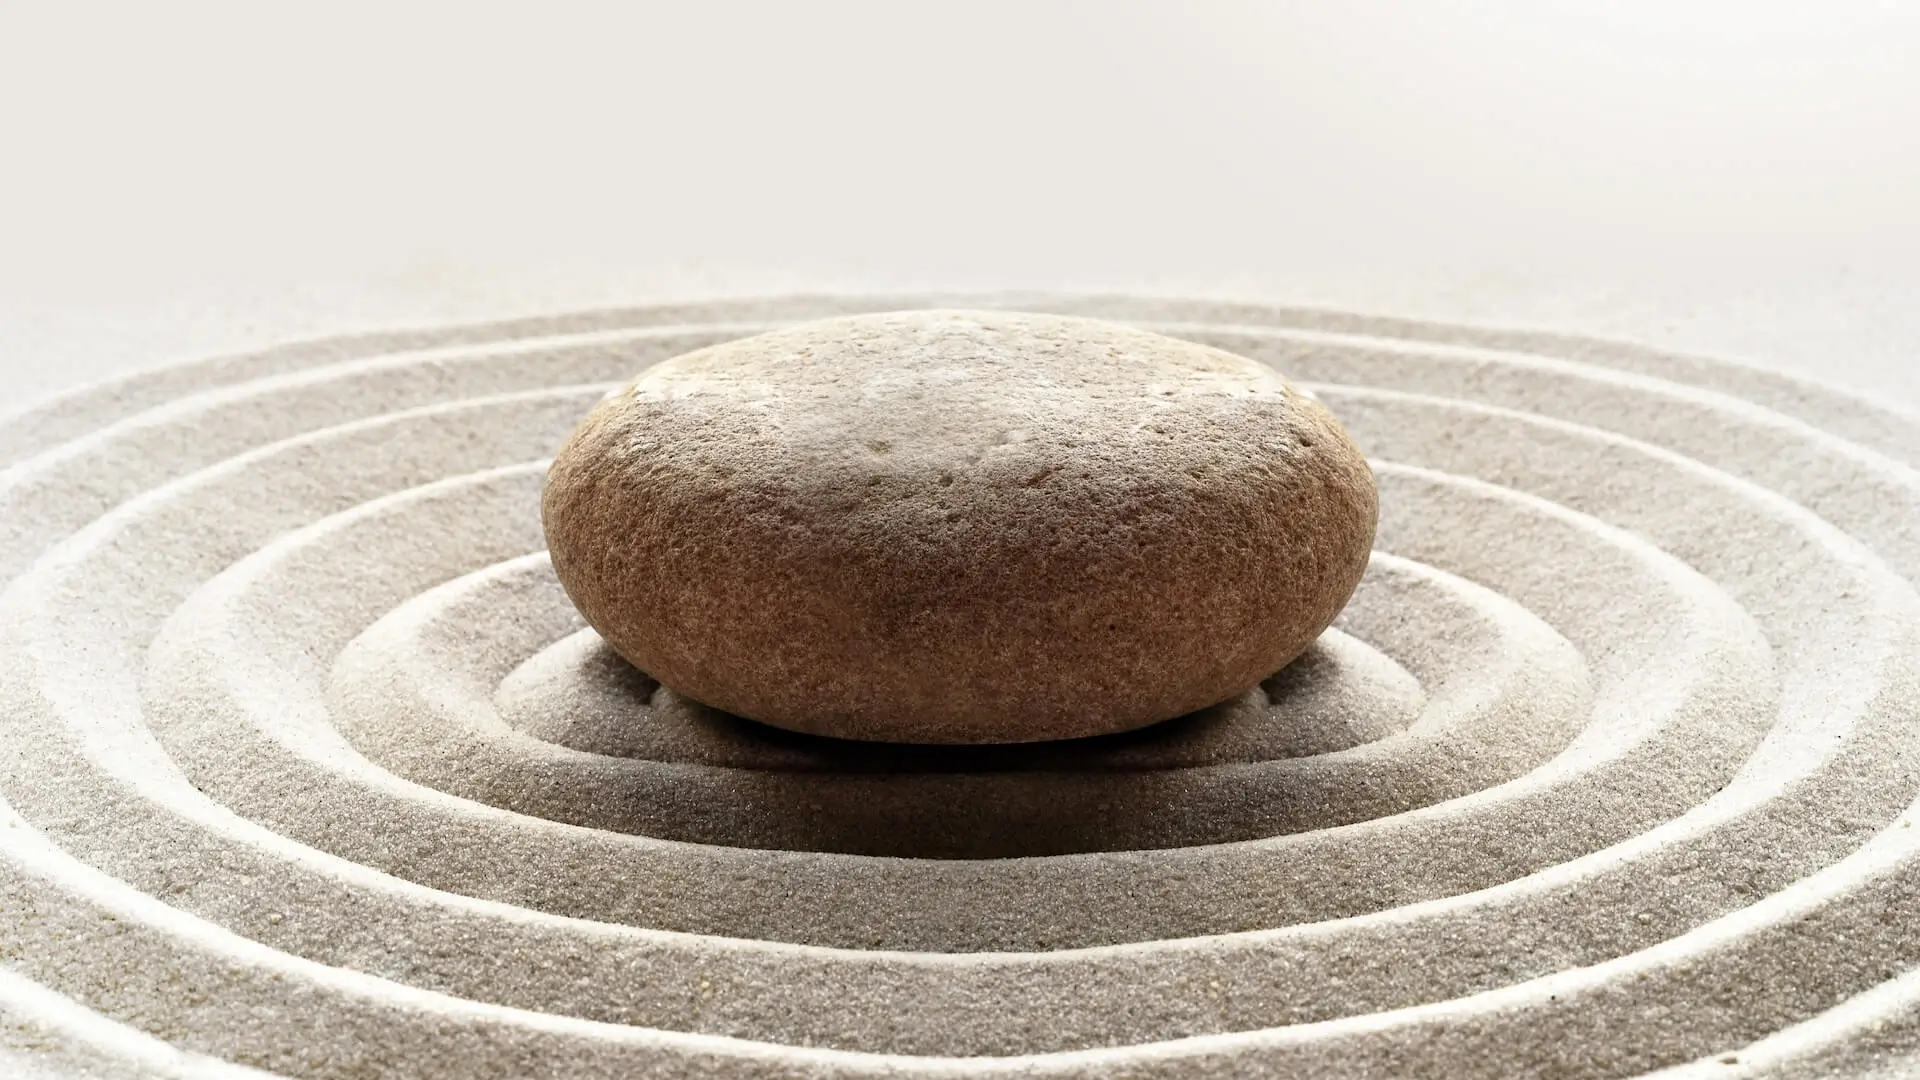 zen garden meditation stone background with stones and lines in sand for relaxation balance and harmony spirituality or spa wellness.